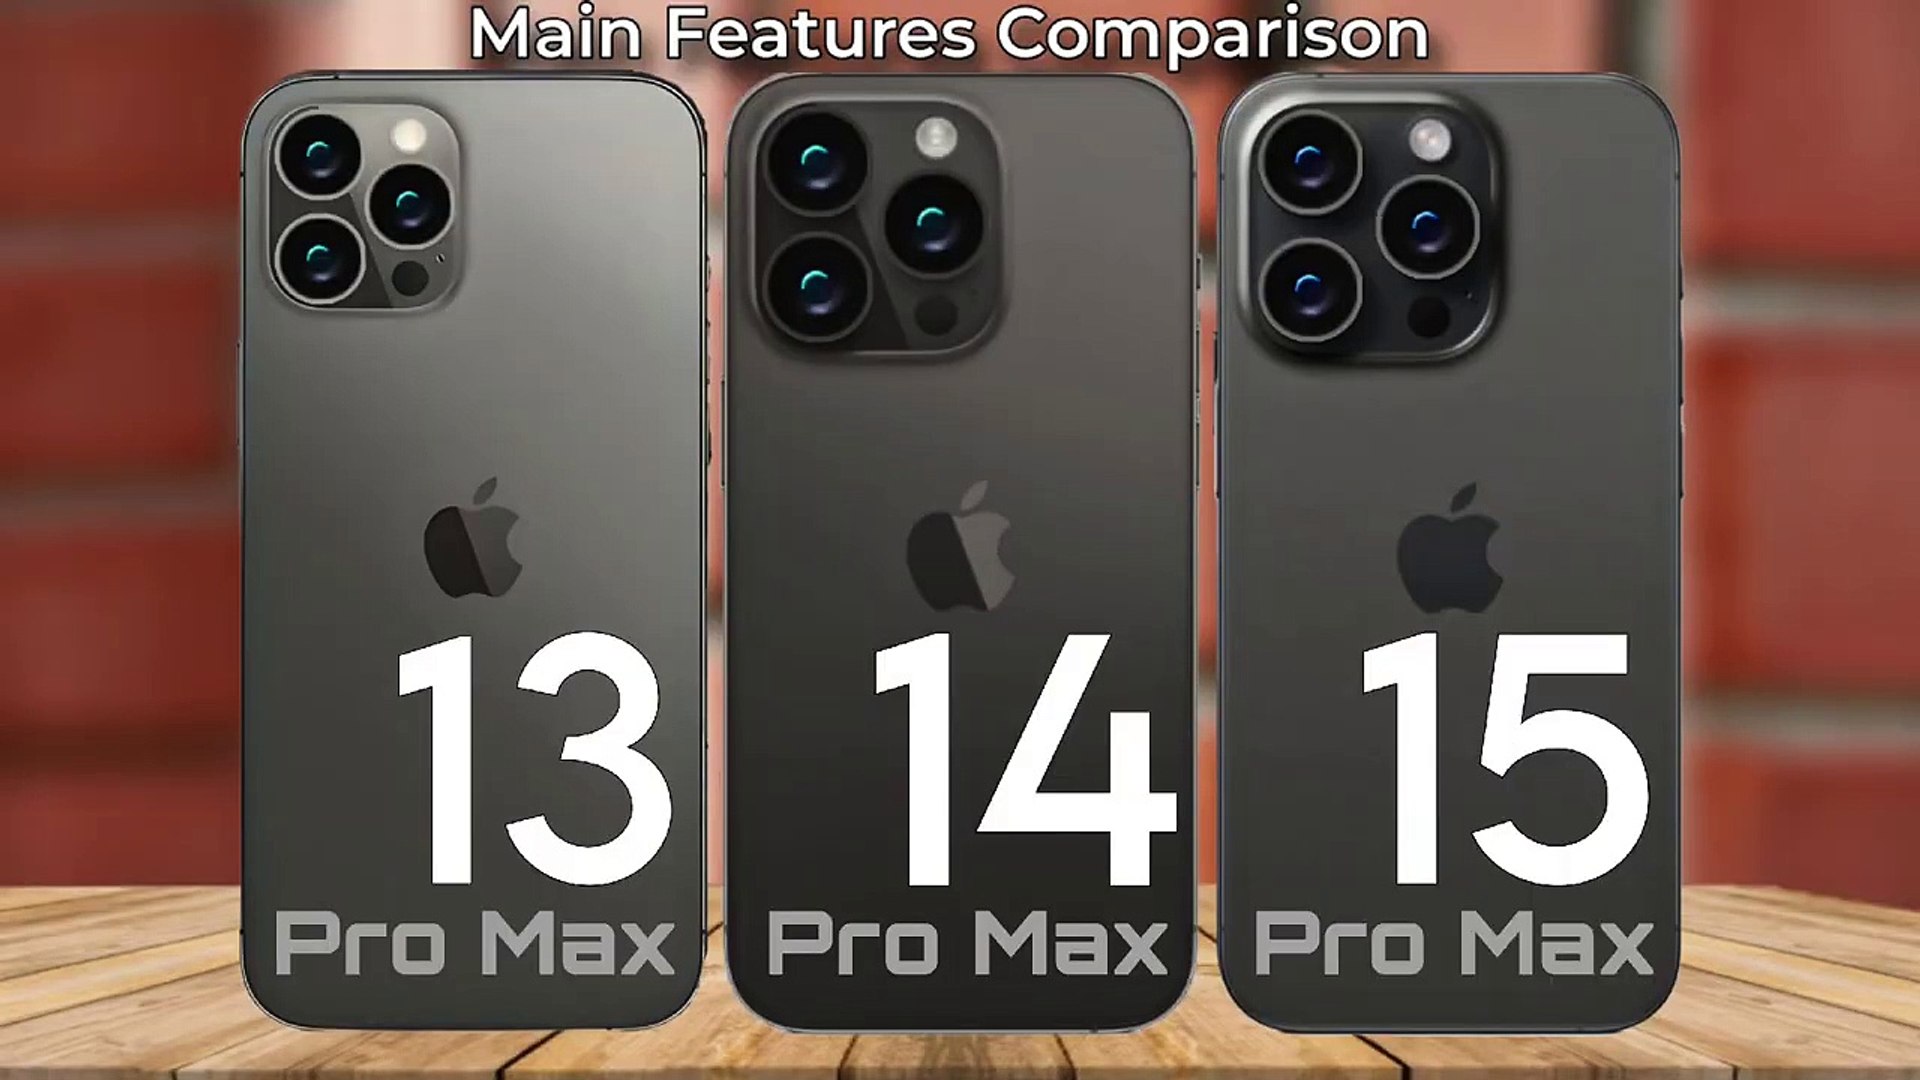 iPhone 13 pro max Asmr unboxing - video Dailymotion